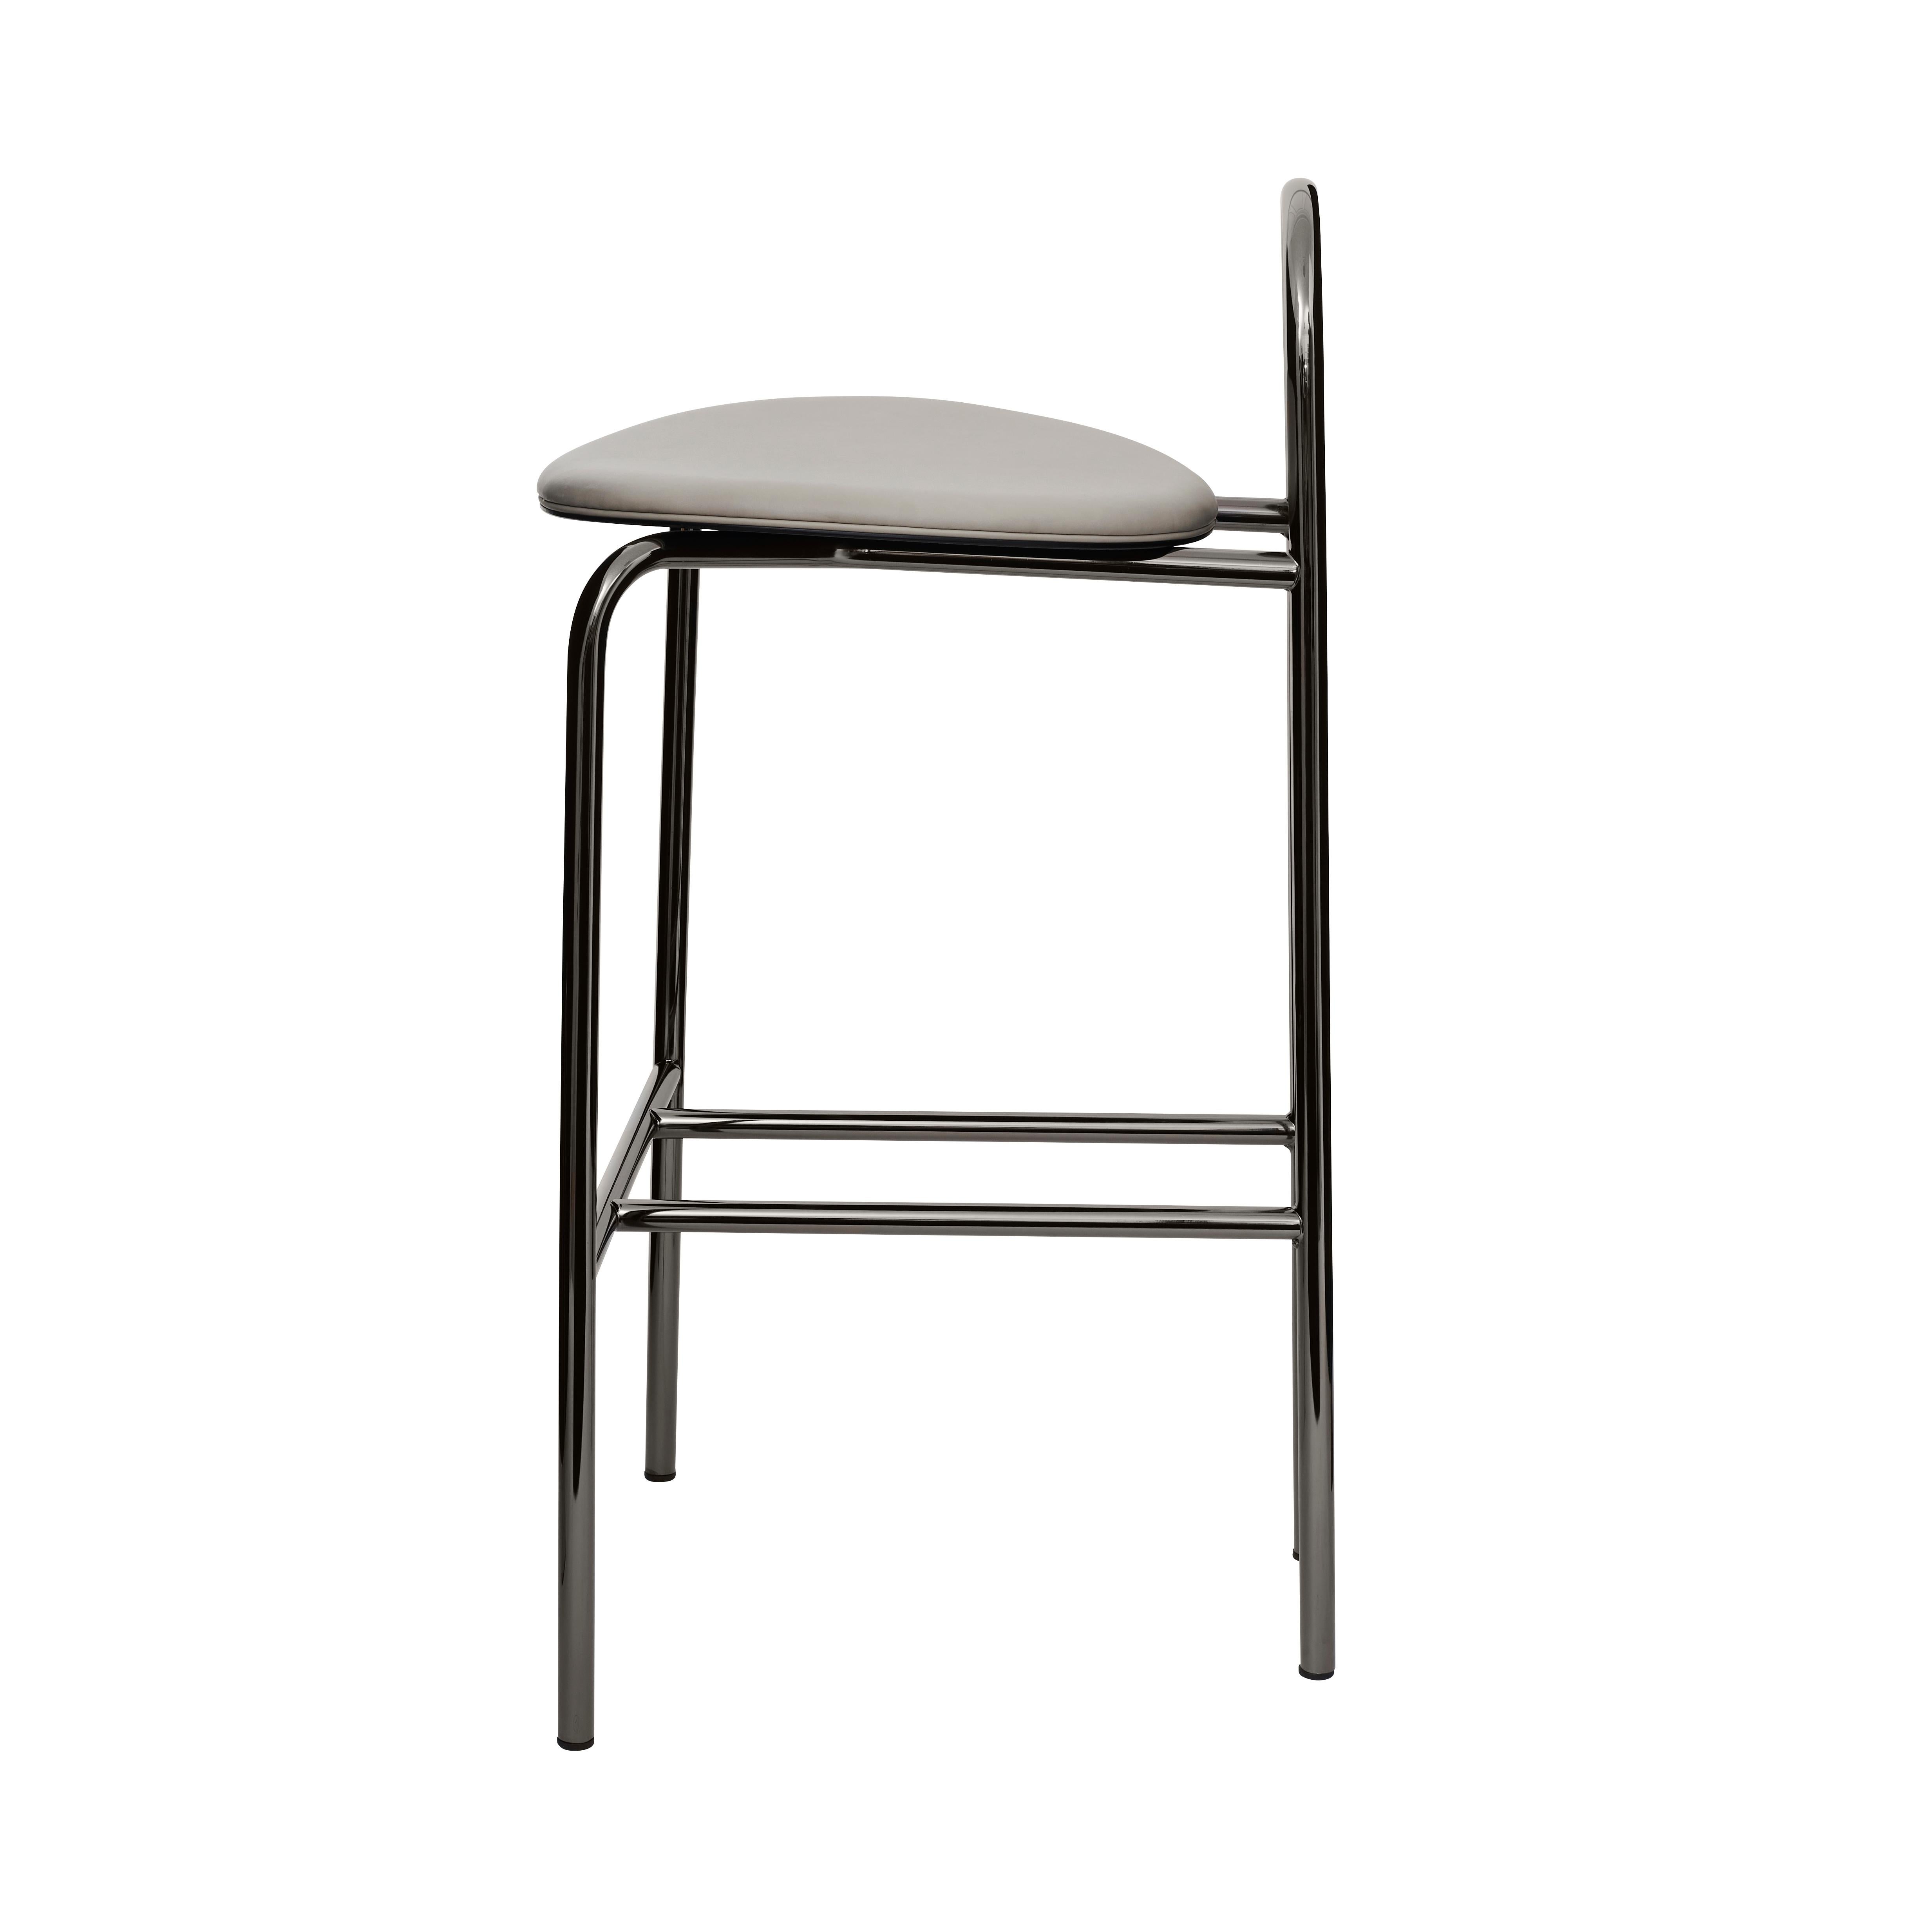 Minimalist SP01 Michelle High Bar Stool in Black Chrome, Made in Italy For Sale